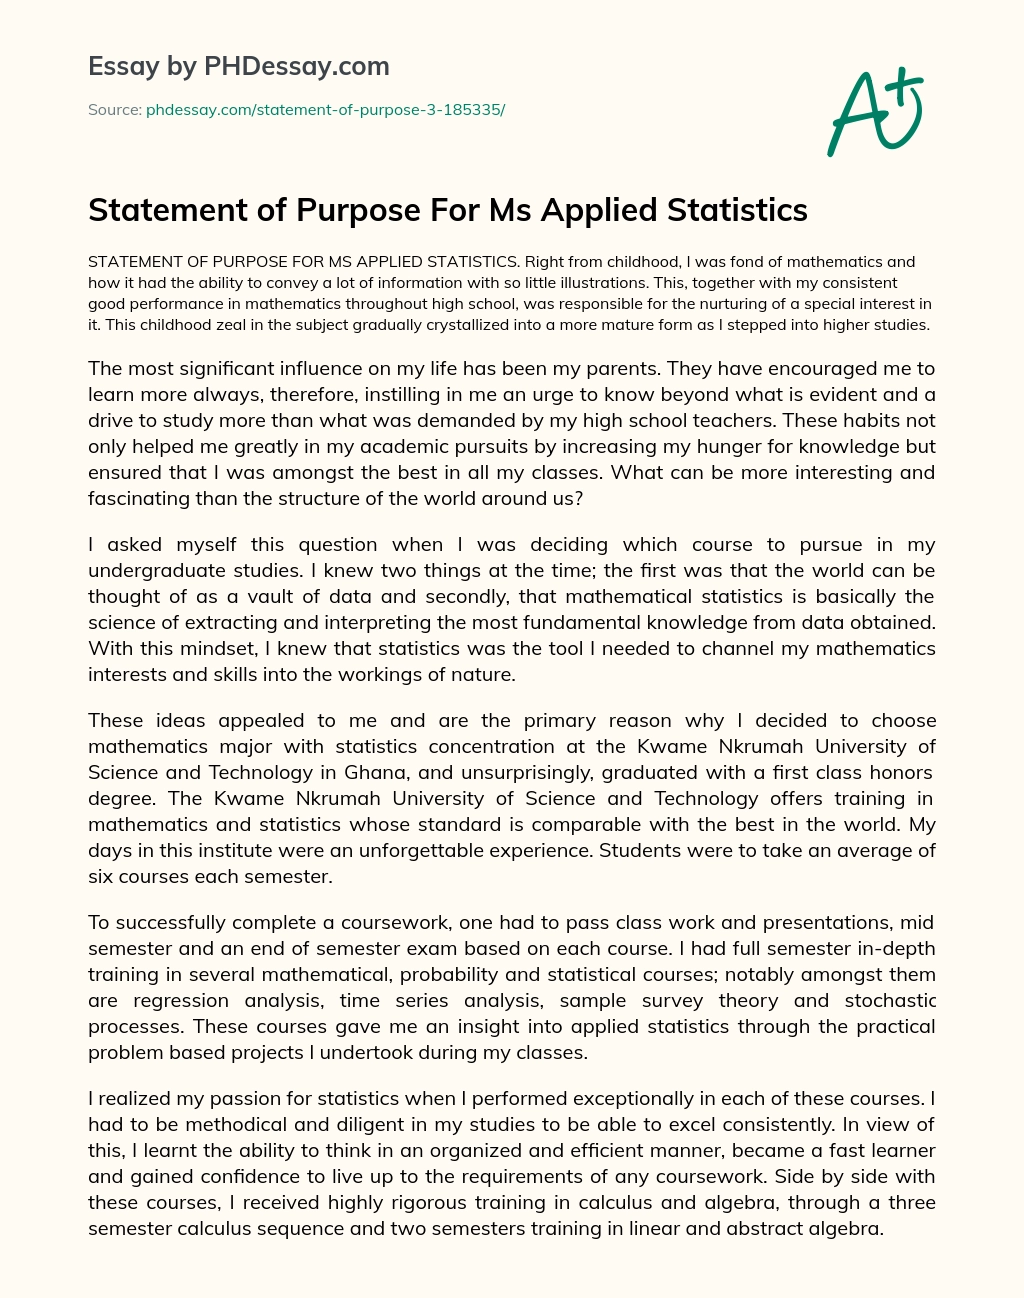 Statement of Purpose For Ms Applied Statistics essay